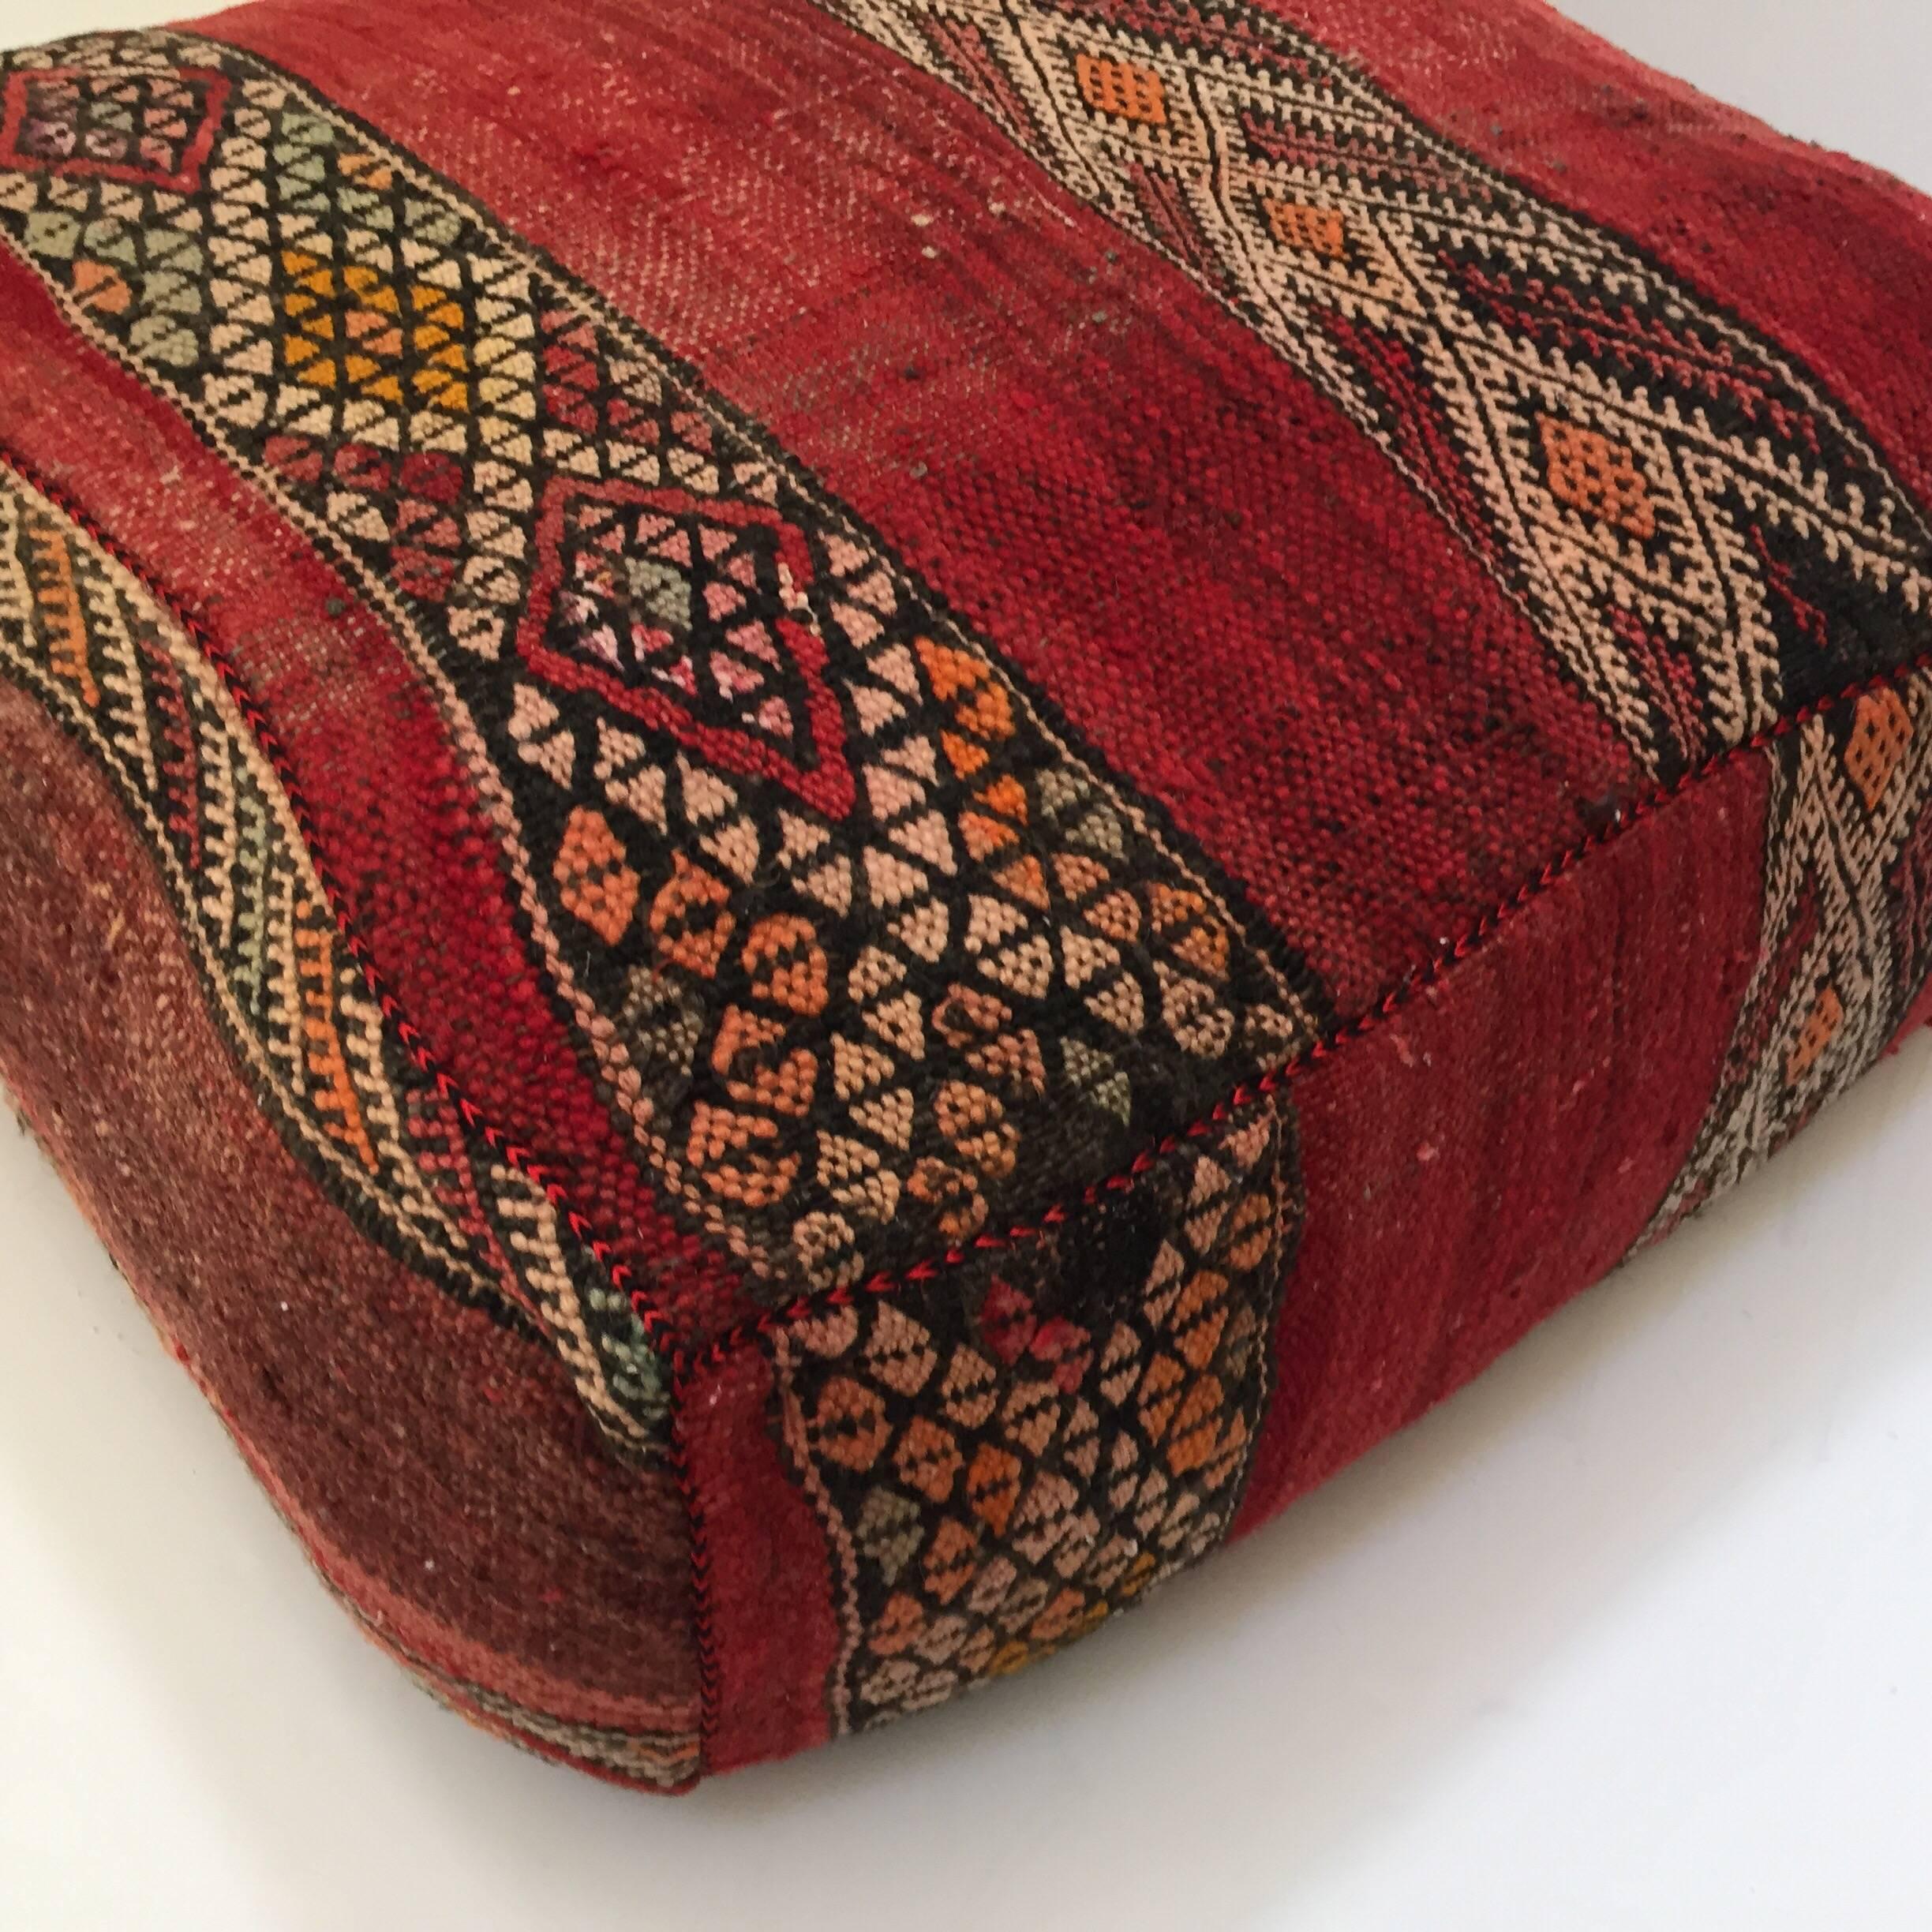 Hand-Woven Moroccan Floor Pillow Tribal Seat Cushion Made from a Vintage Berber Rug